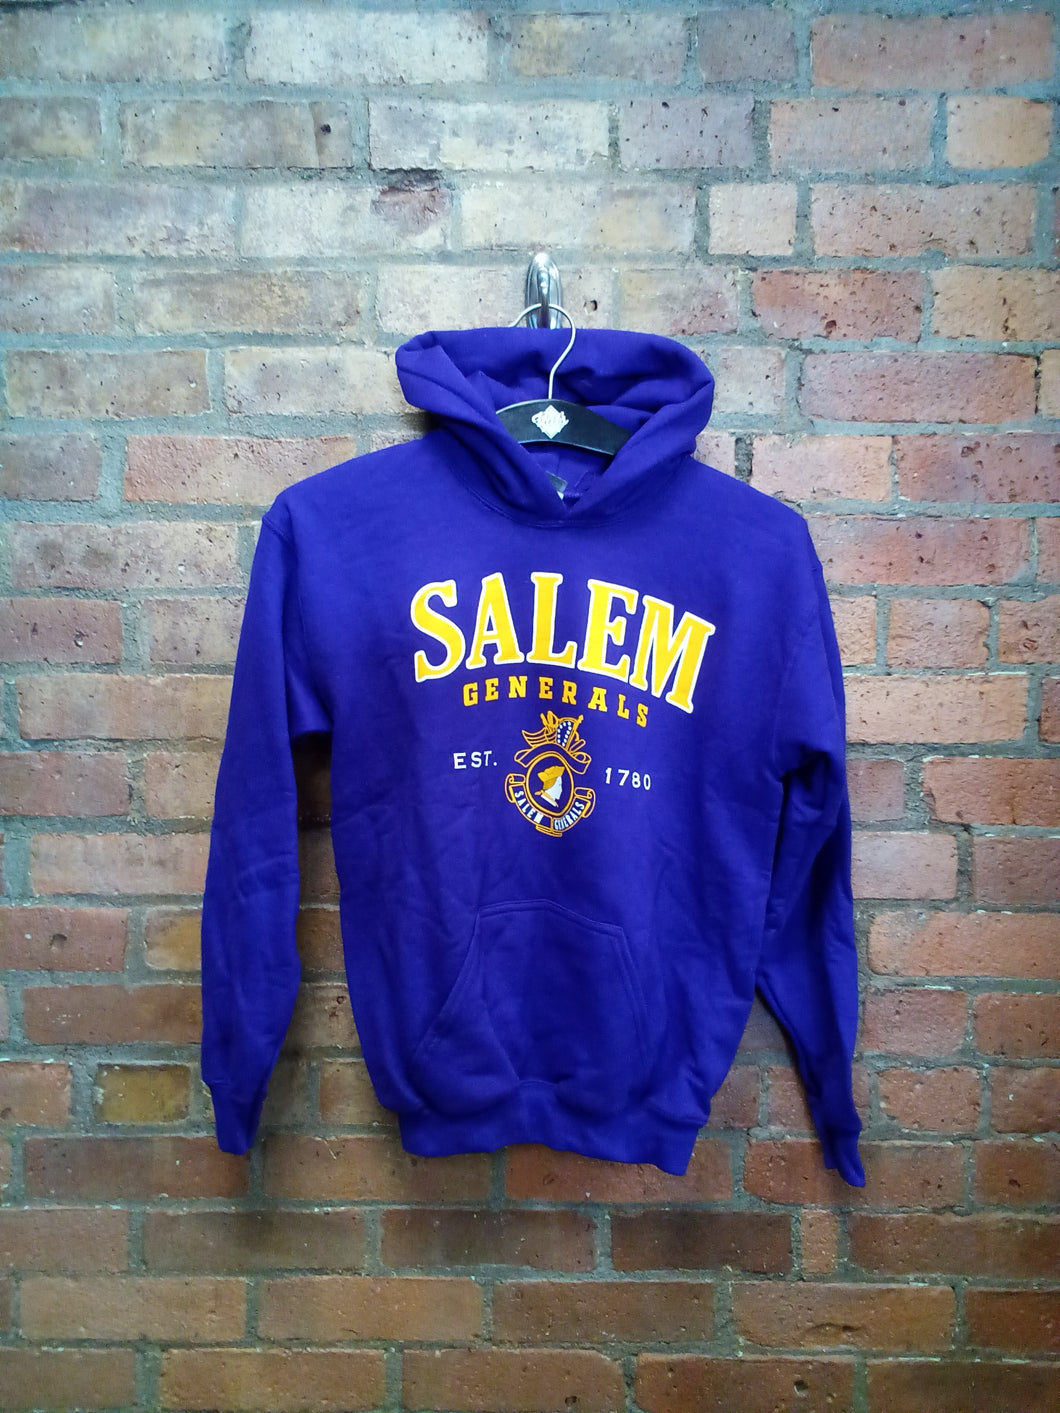 CLEARANCE - Salem Generals Youth Hooded Sweatshirt - Size Large